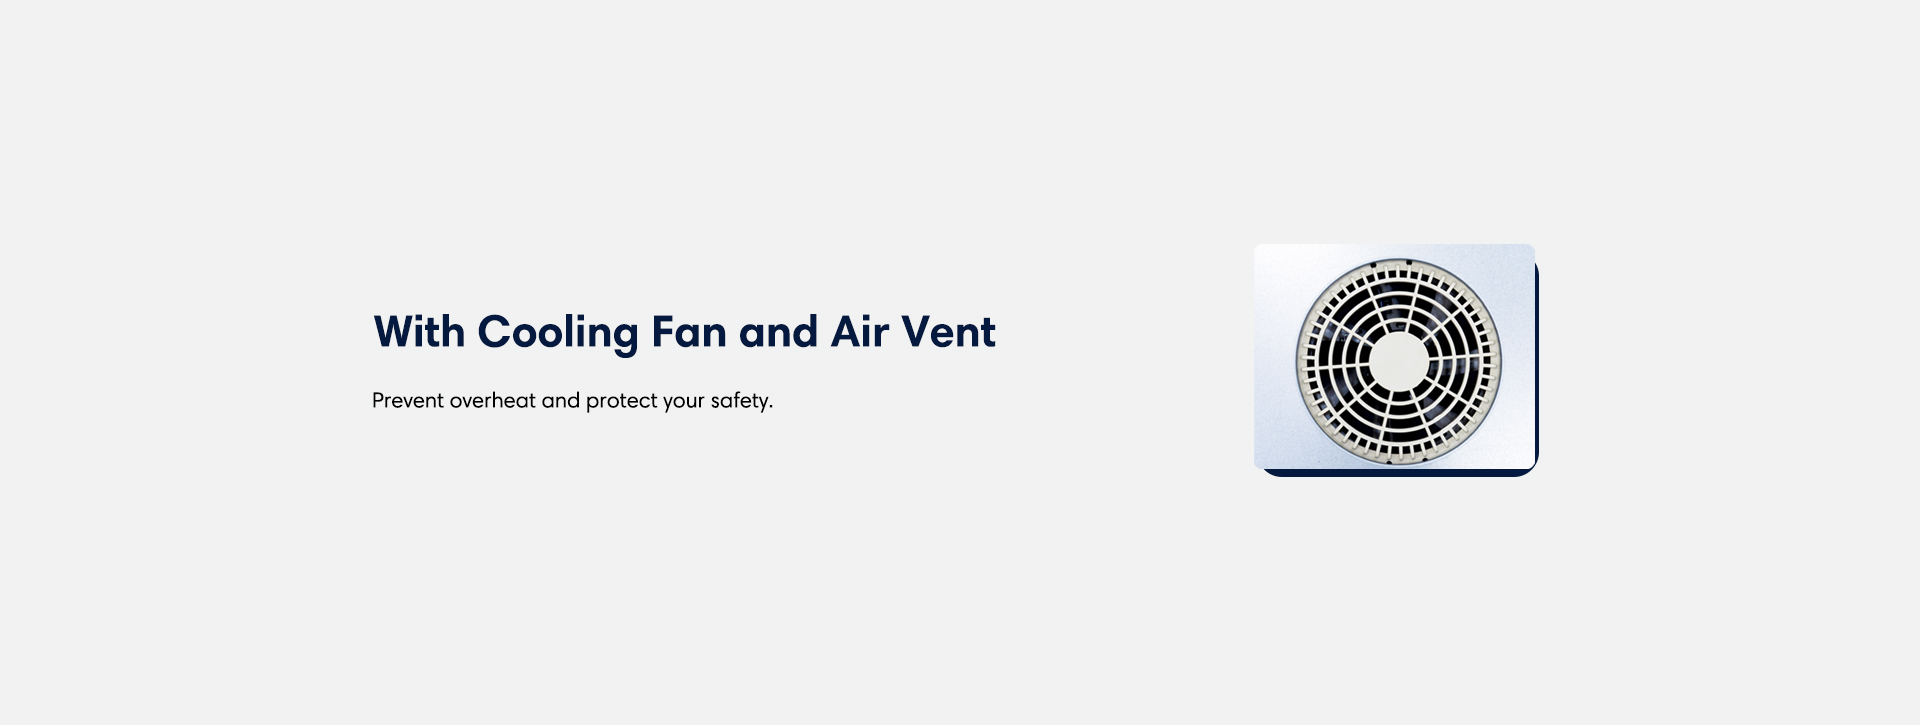 With cooling fan and air vent Prevent overheat and protect your safety.